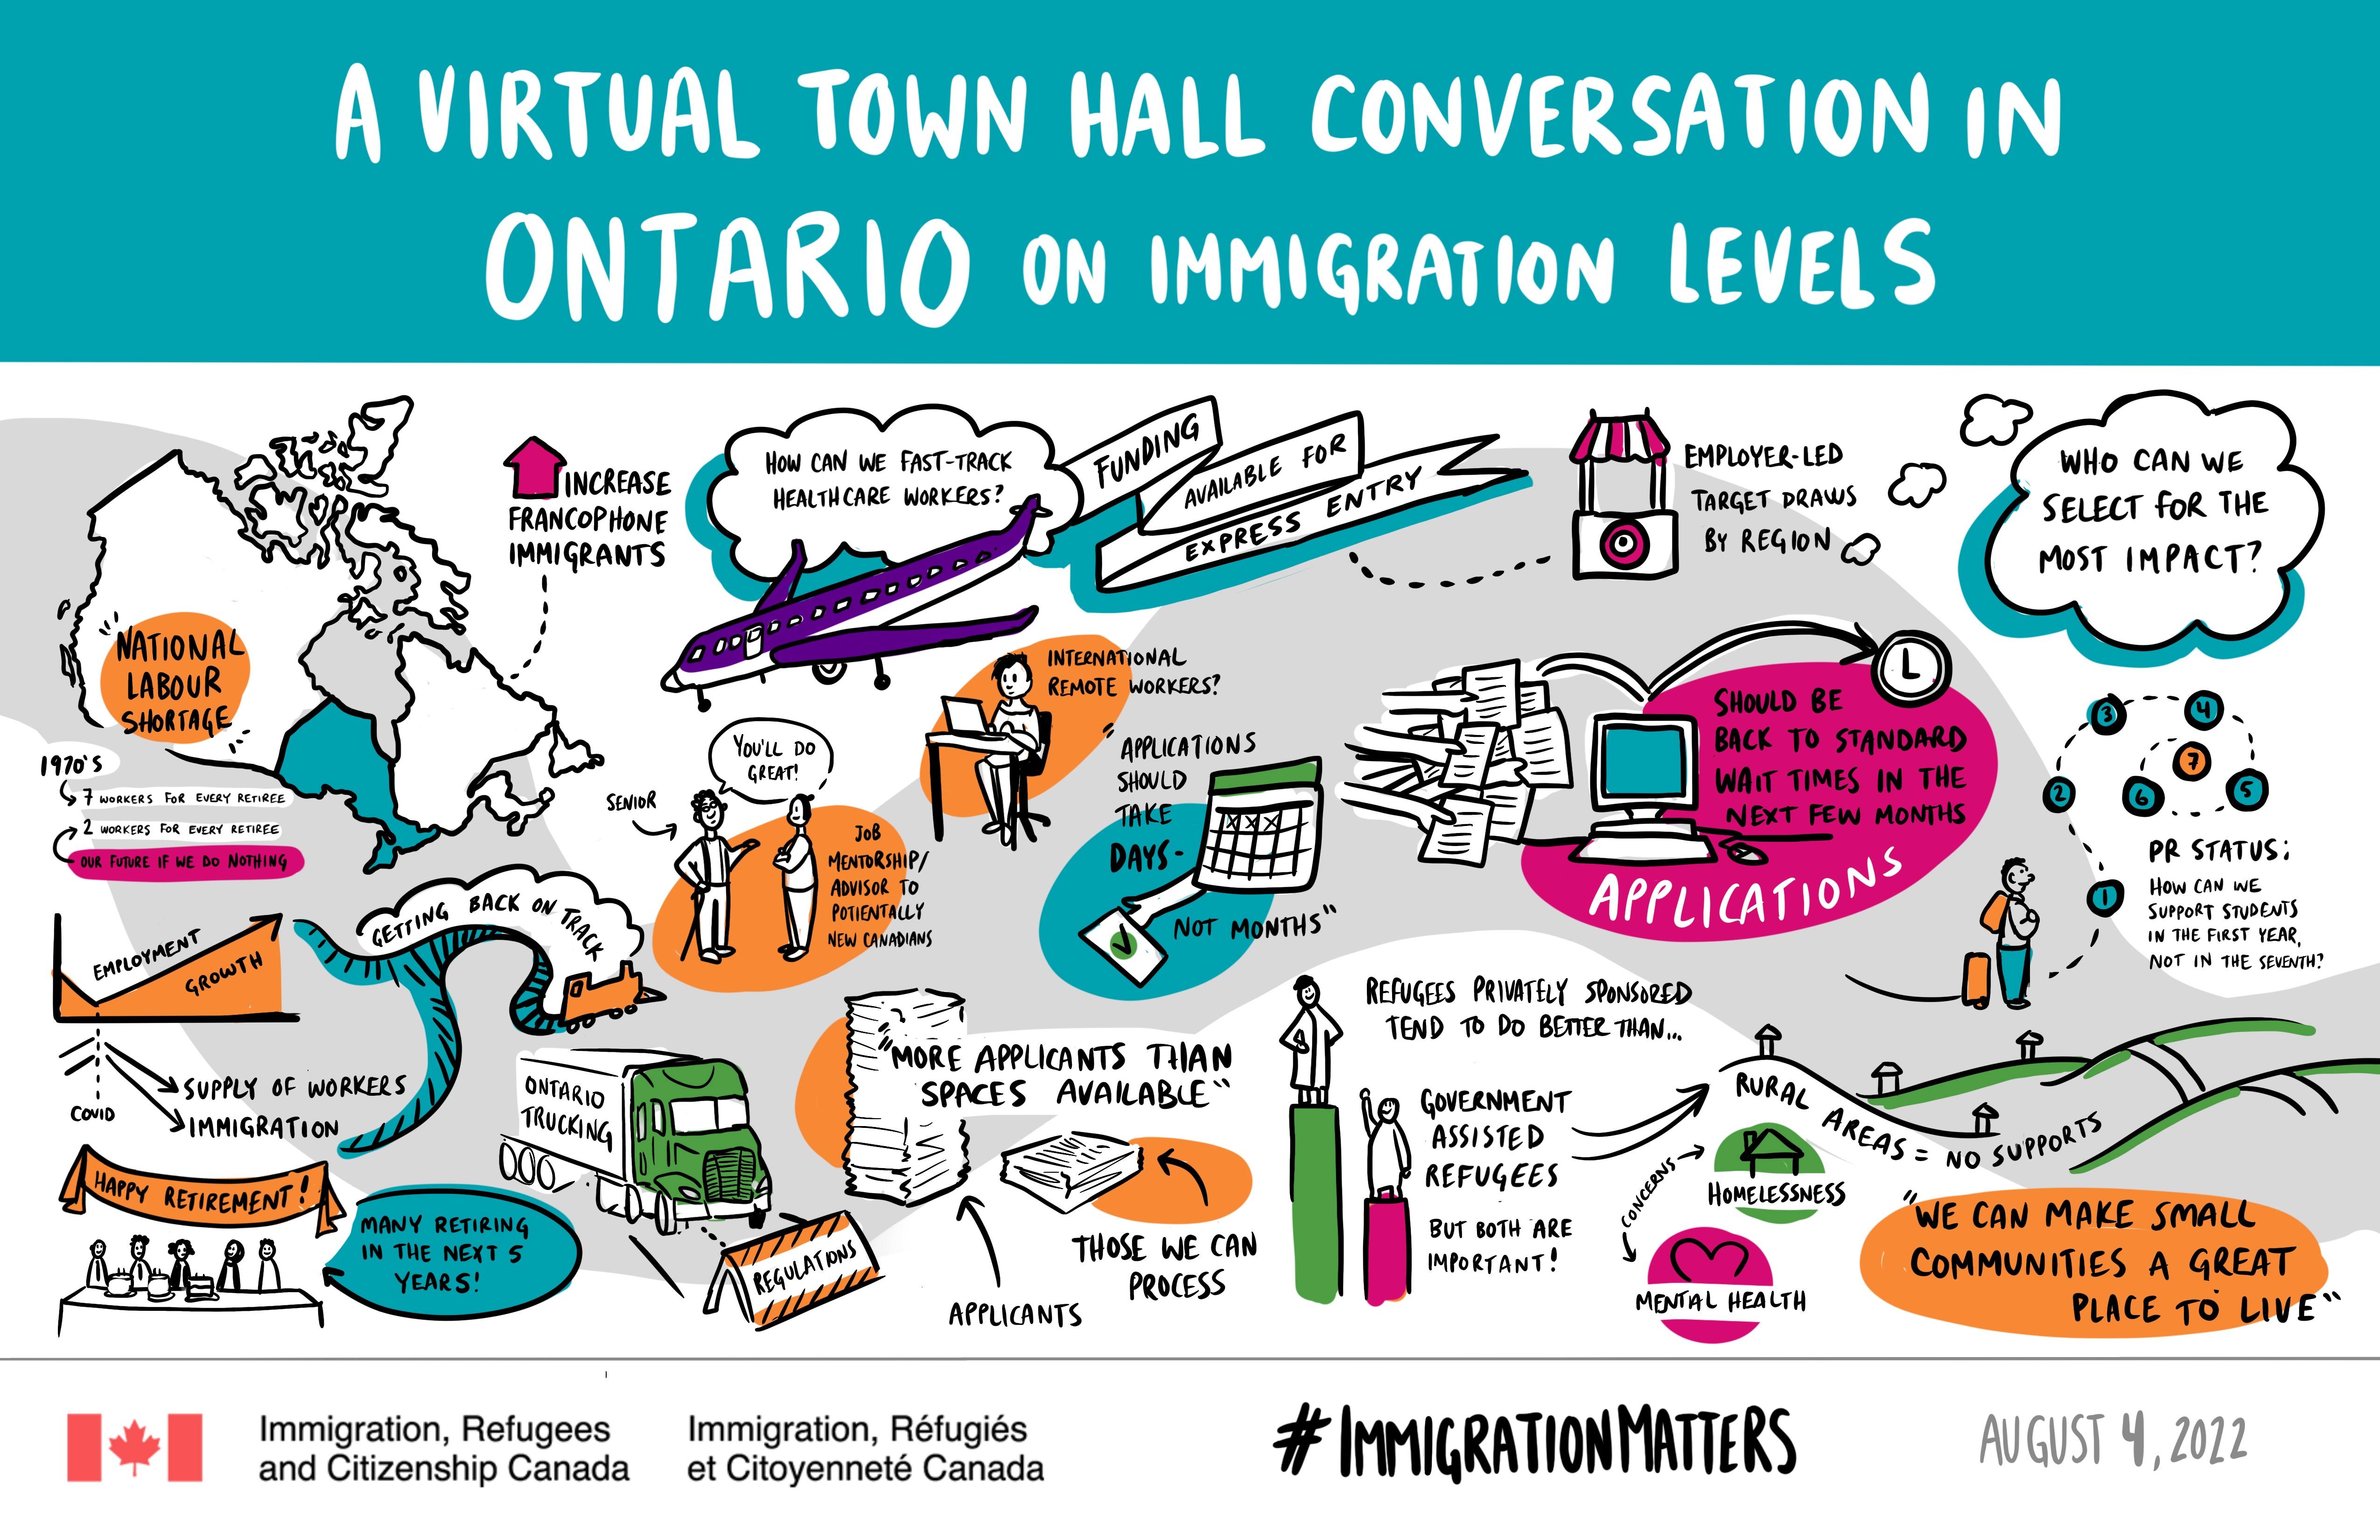 A virtual town hall conversation in Ontario on immigration levels